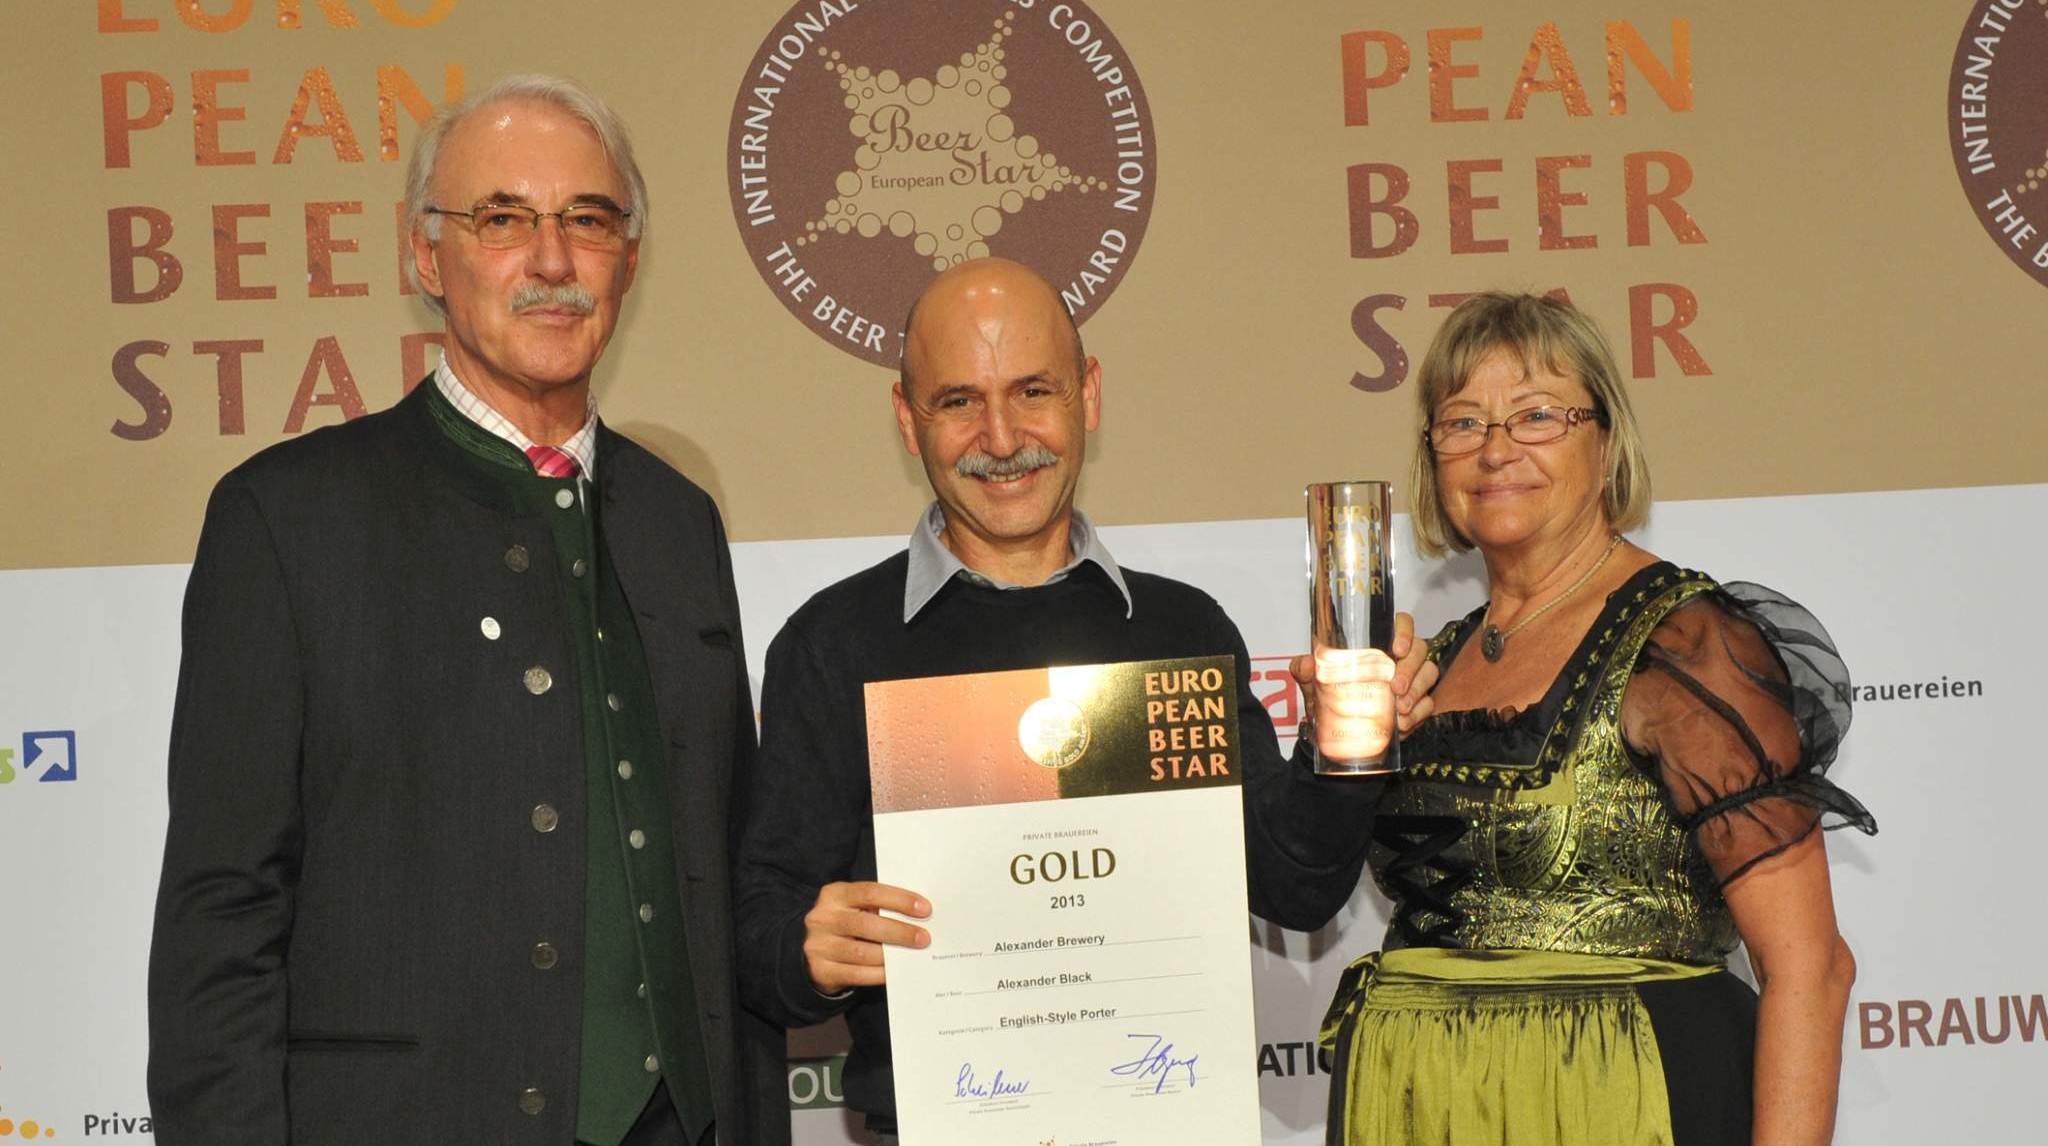 And the European Beer Star for best English Porter goes to.... Ori Sagy, CEO of Israel's Alexander brewery.